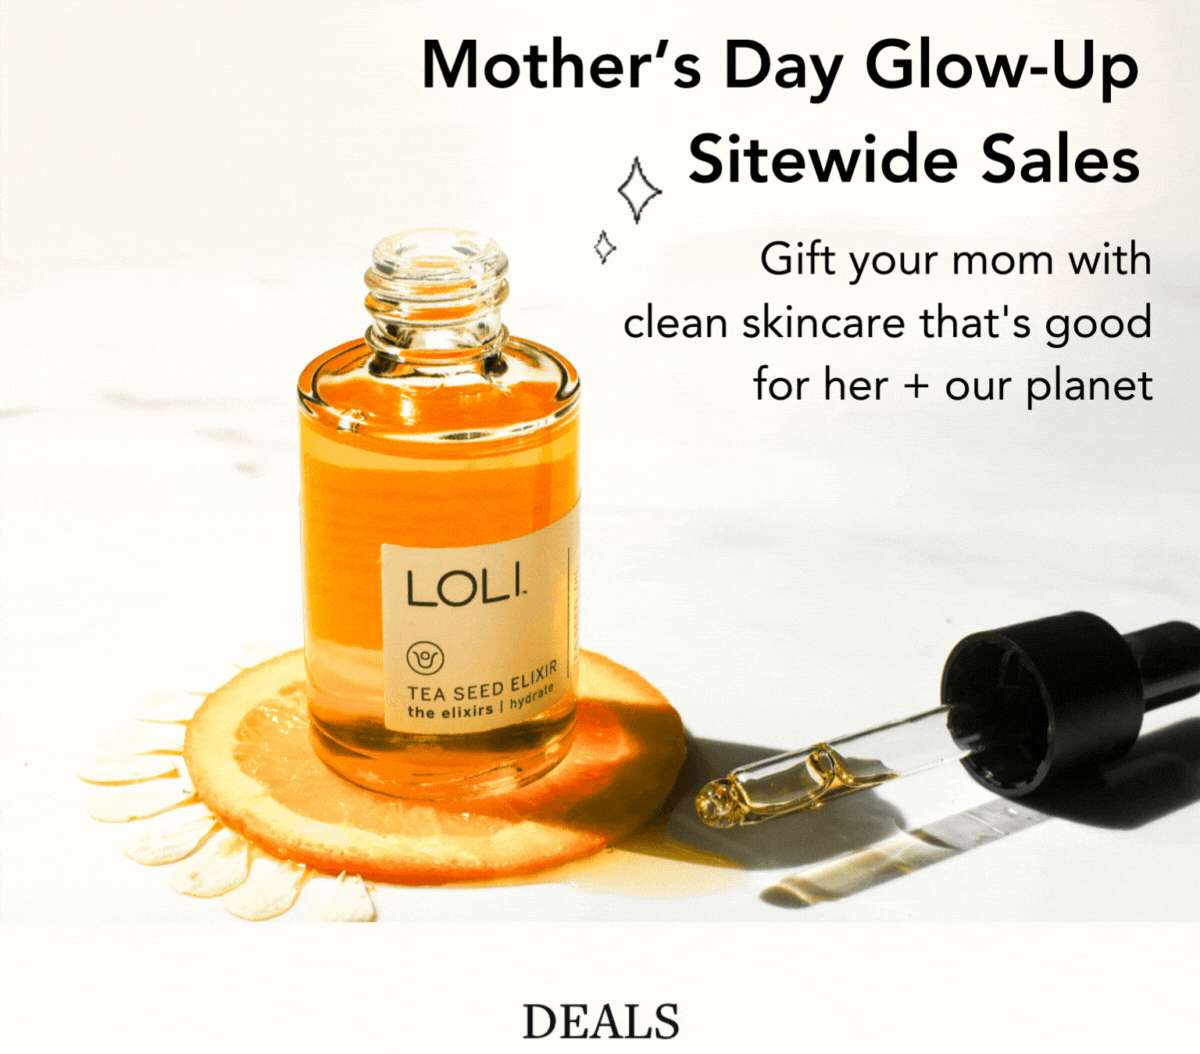 The Summer Glow-Up Sitewide Sale